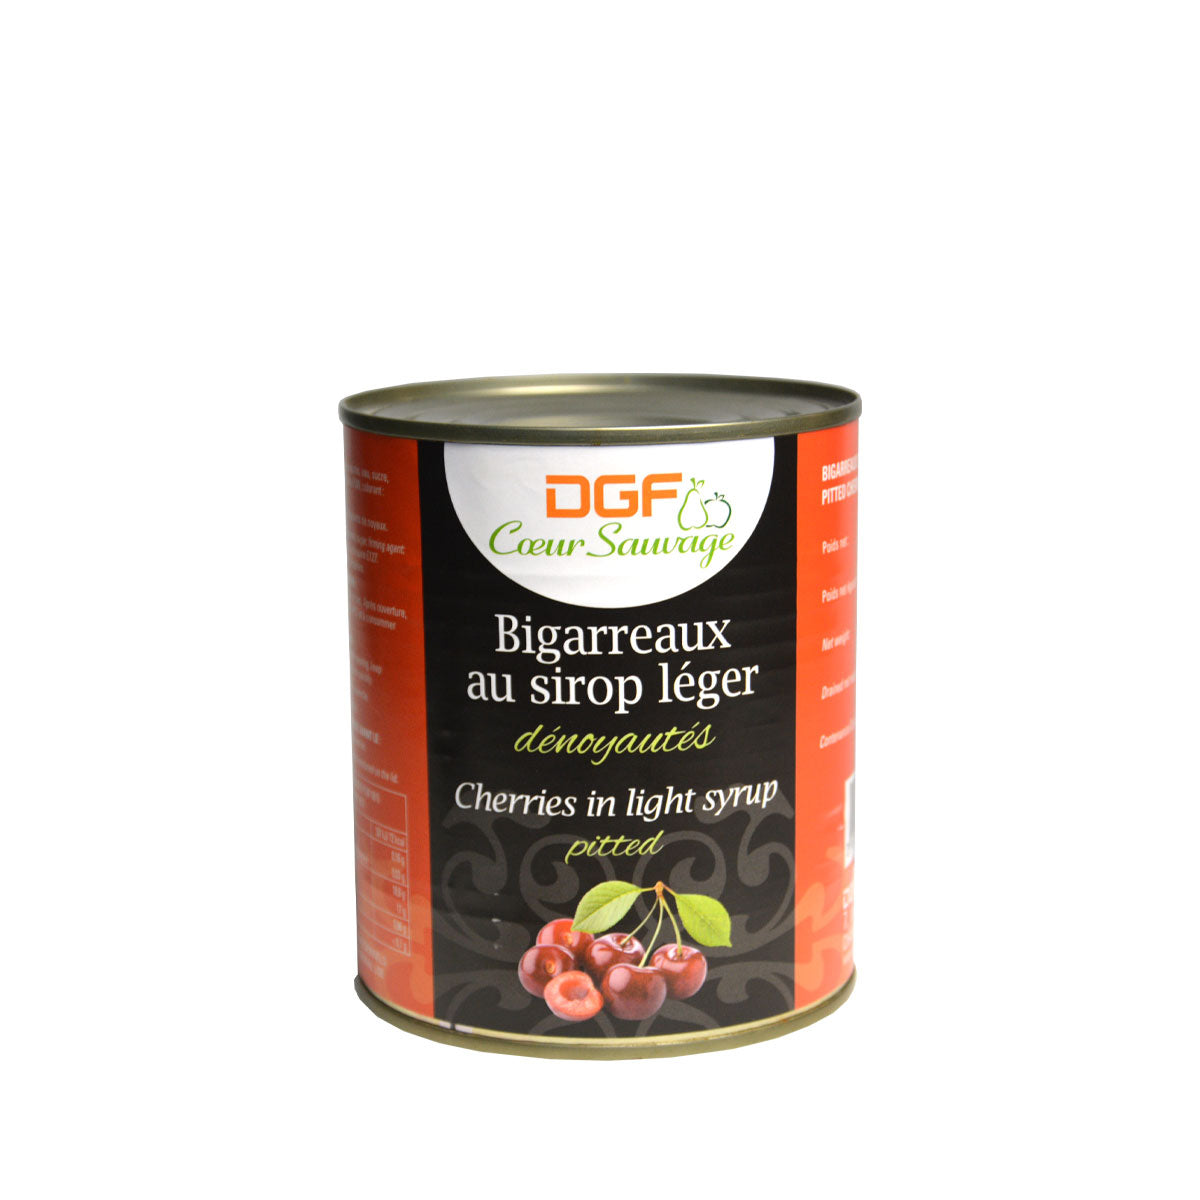 Pitted Biggareaux Cherries in can packaging 2 lb can